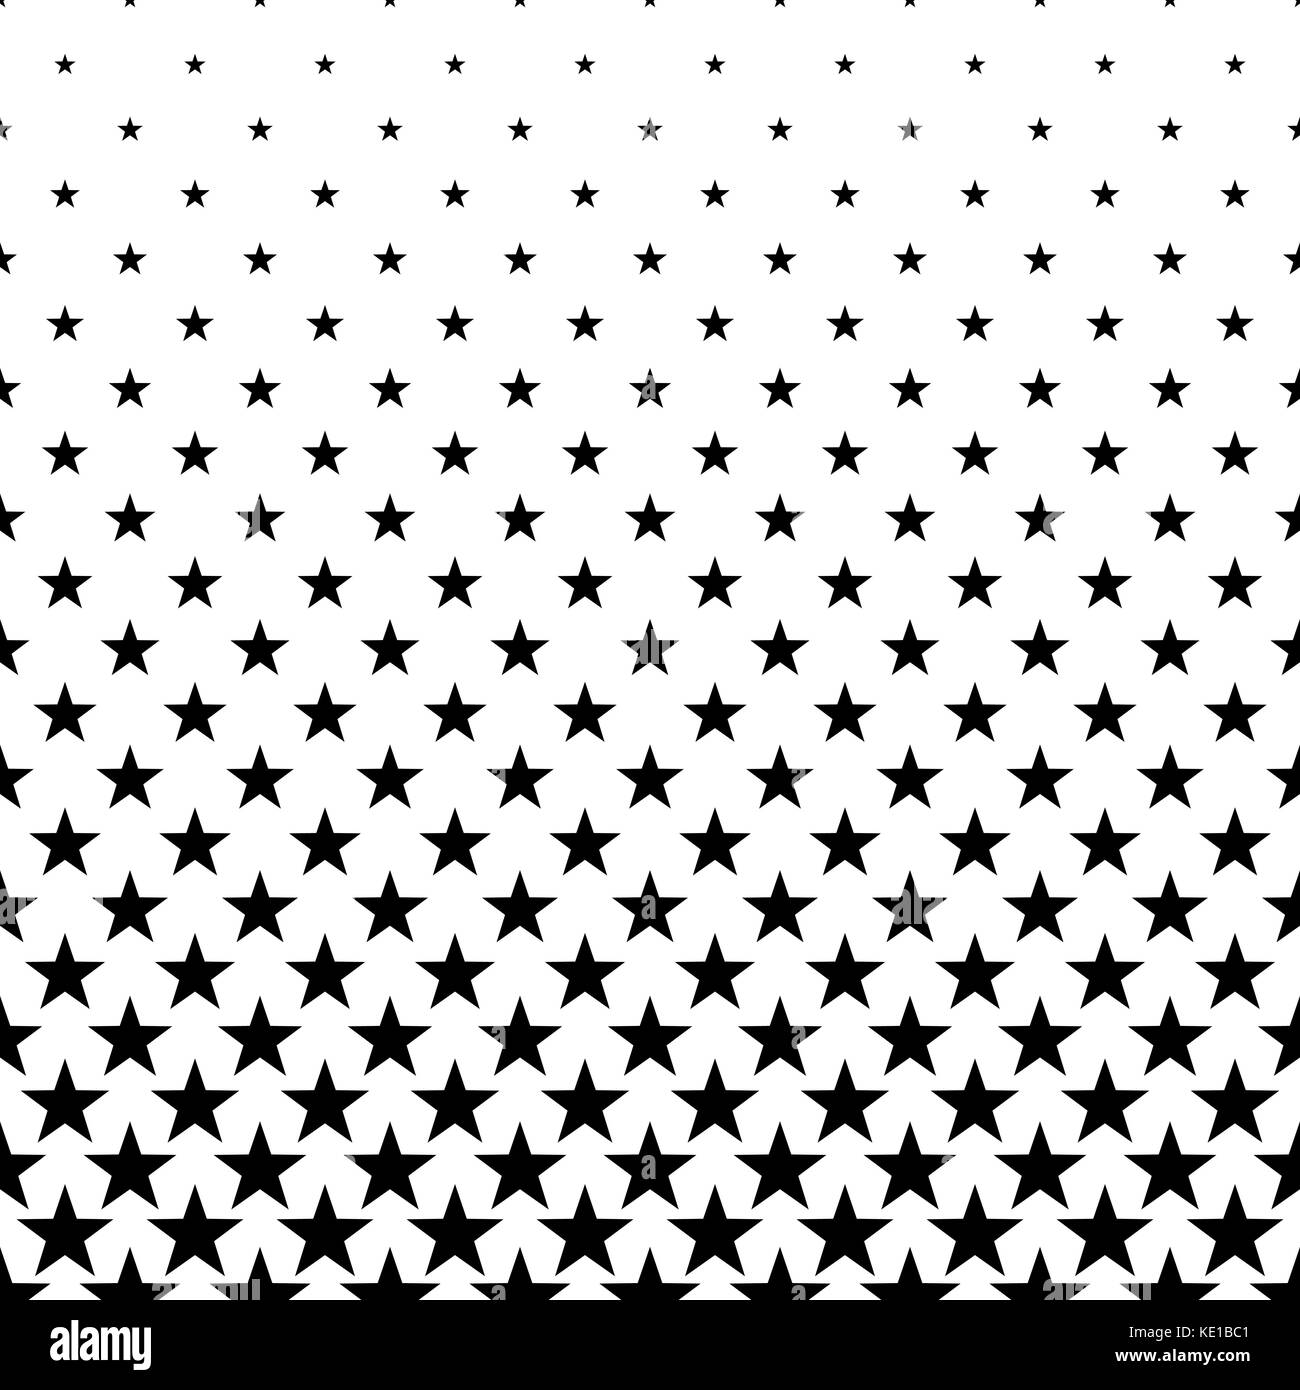 Monochrome star pattern - abstract vector background design from geometrical shapes Stock Vector